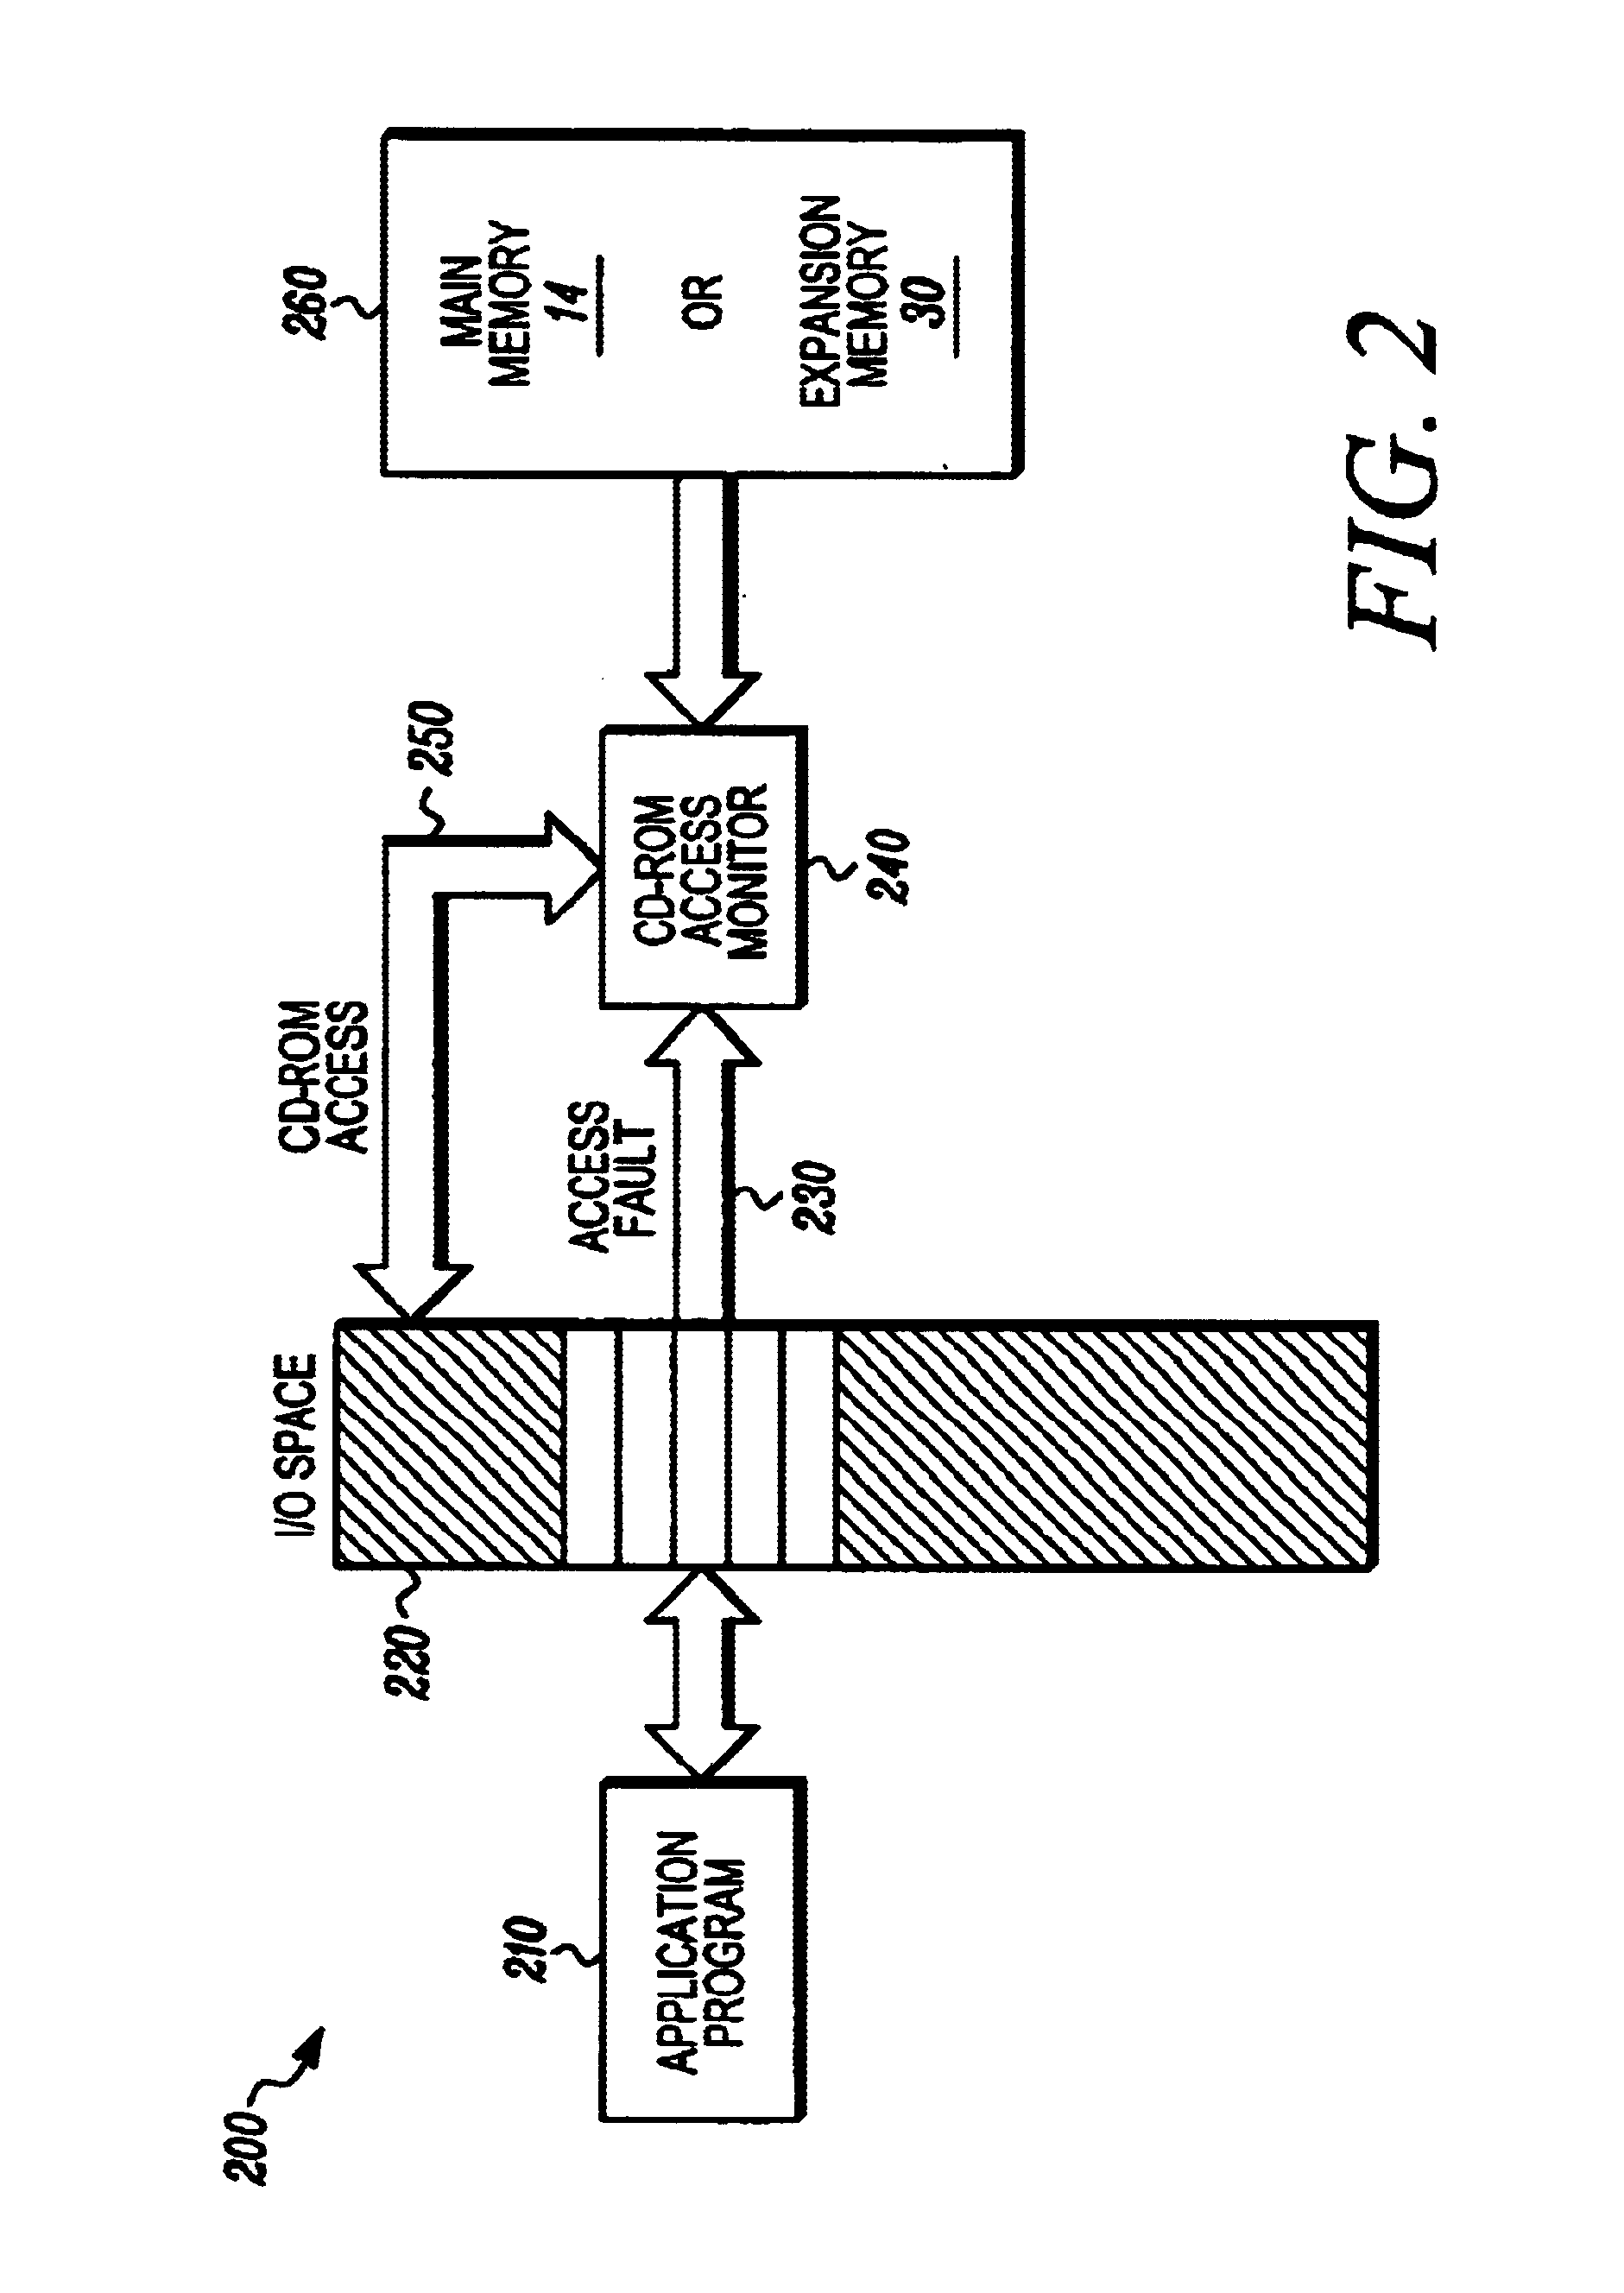 Method and system for providing memory-based device emulation